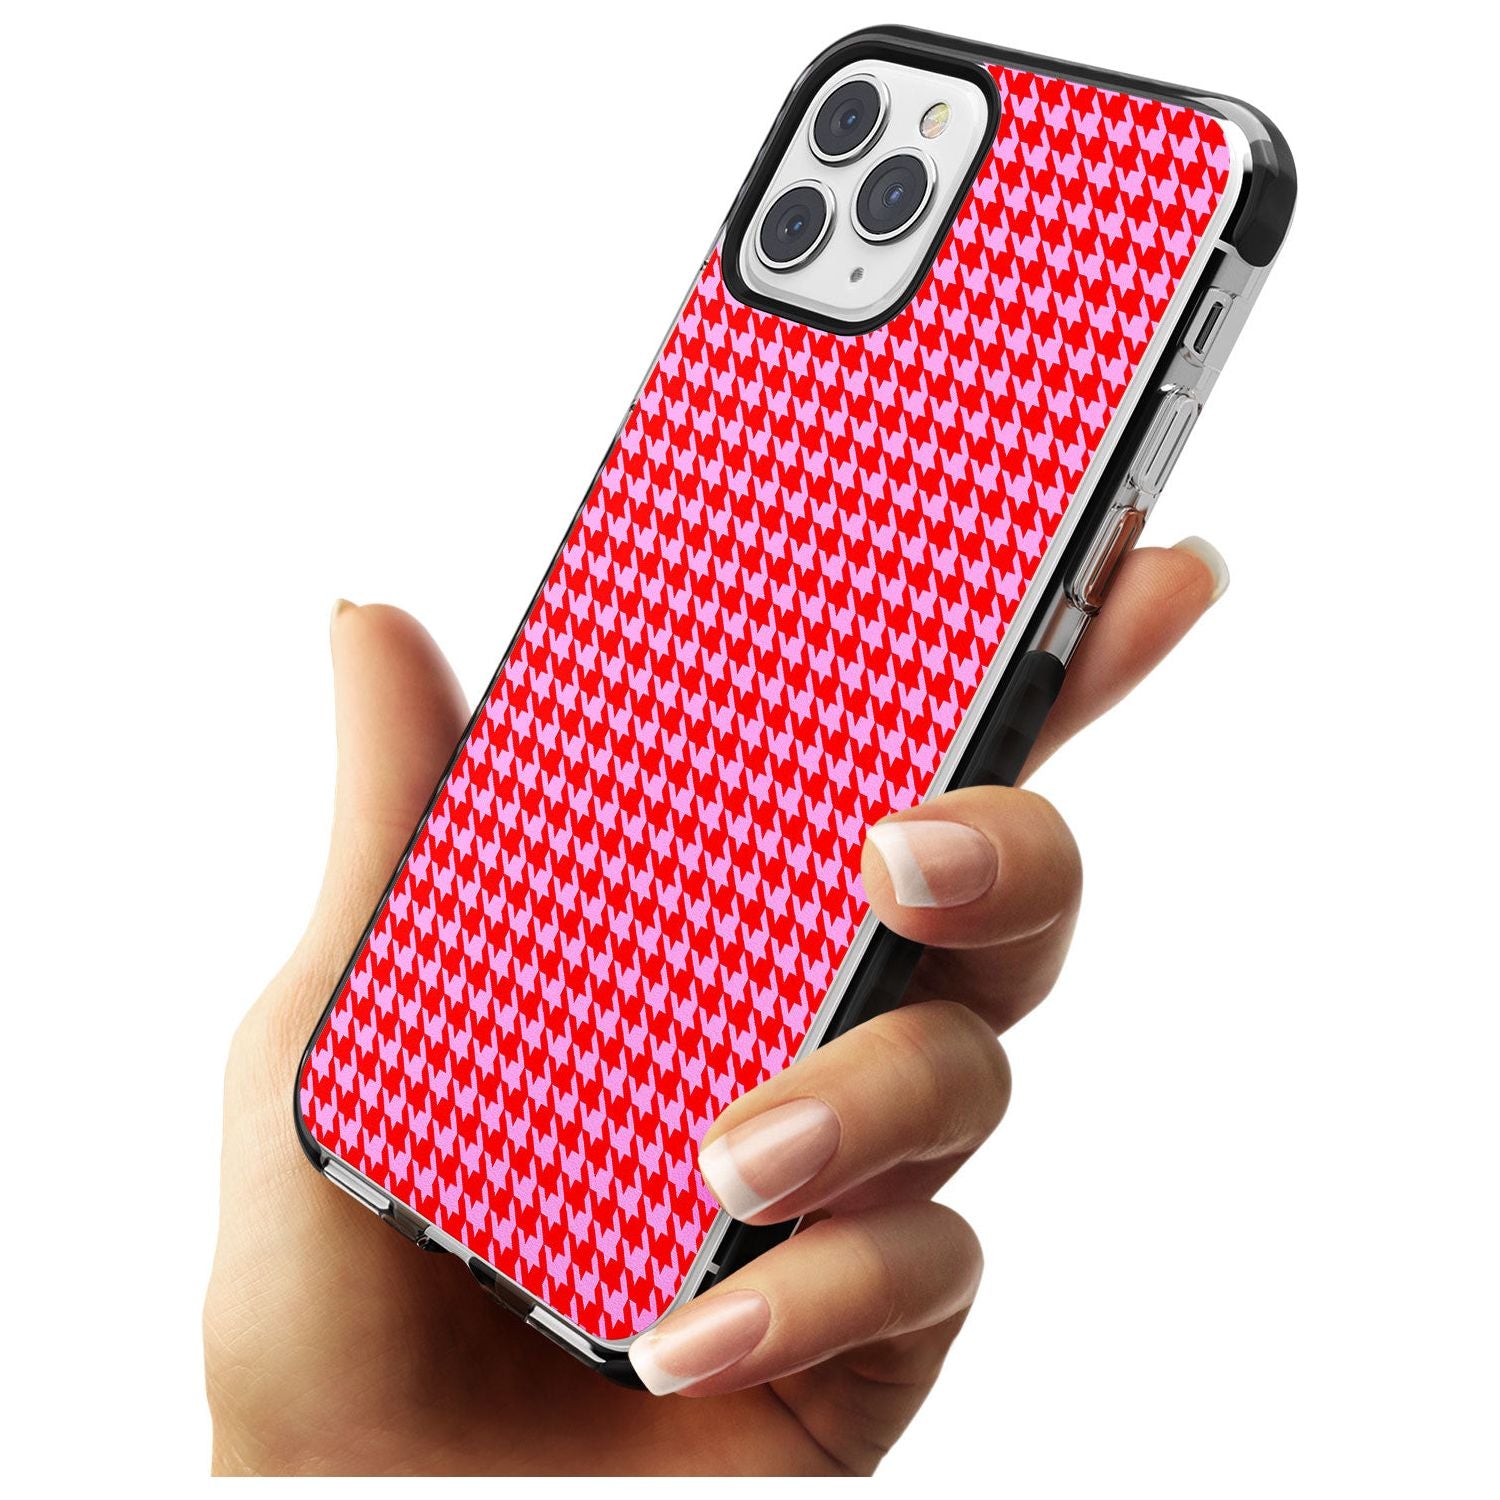 Neon Pink & Red Houndstooth Pattern Black Impact Phone Case for iPhone 11 Pro Max